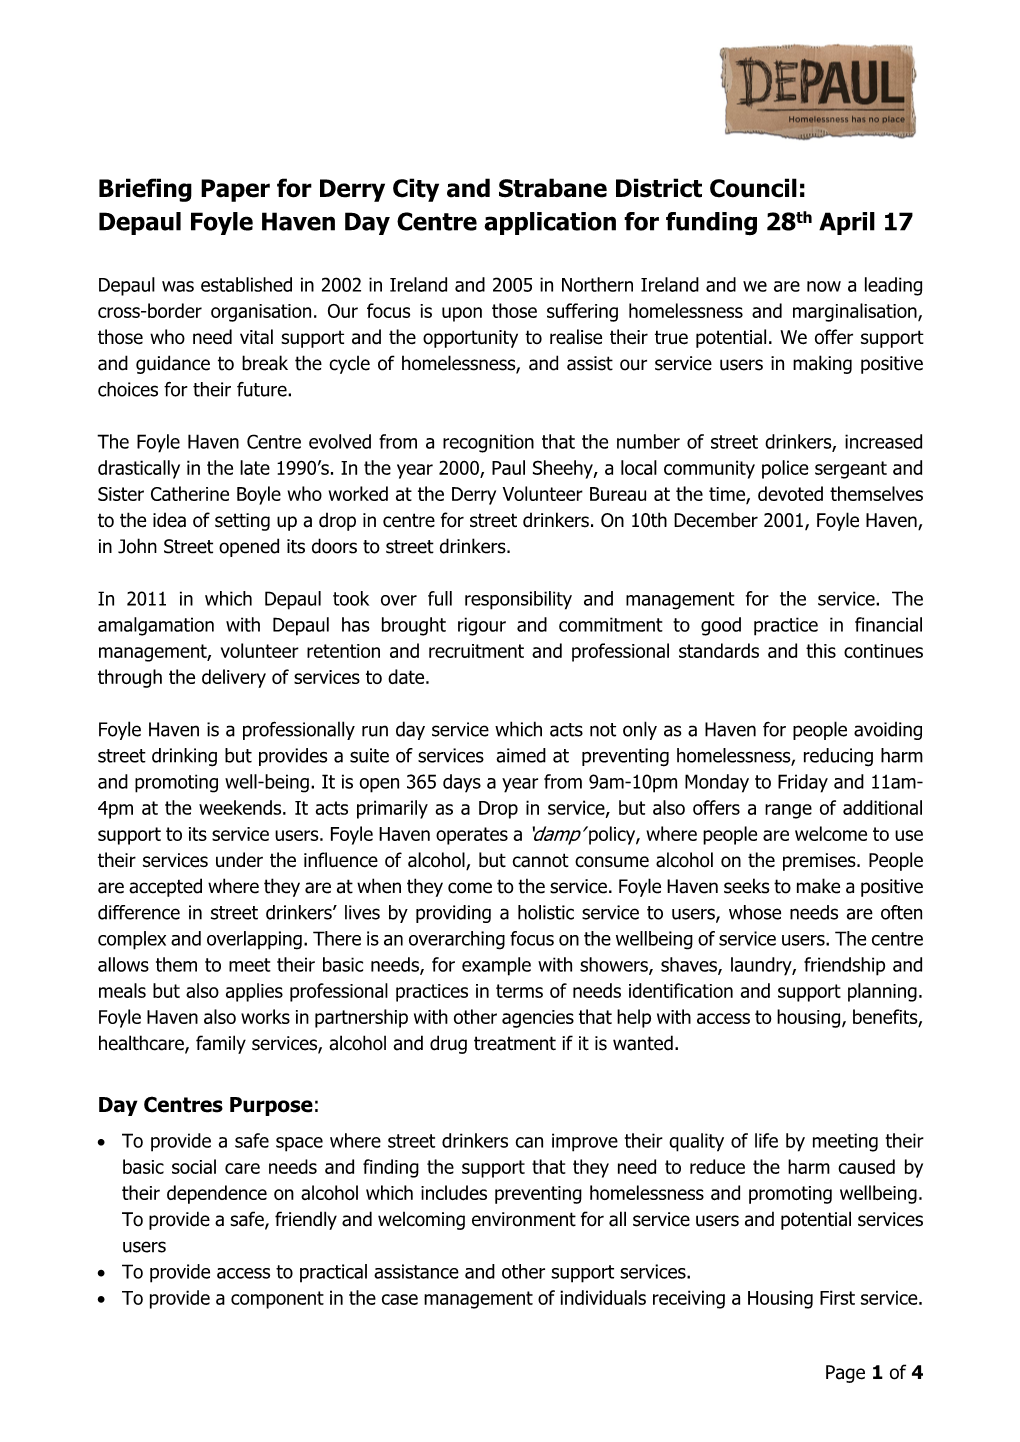 Briefing Paper for Derry City and Strabane District Council: Depaul Foyle Haven Day Centre Application for Funding 28Th April 17